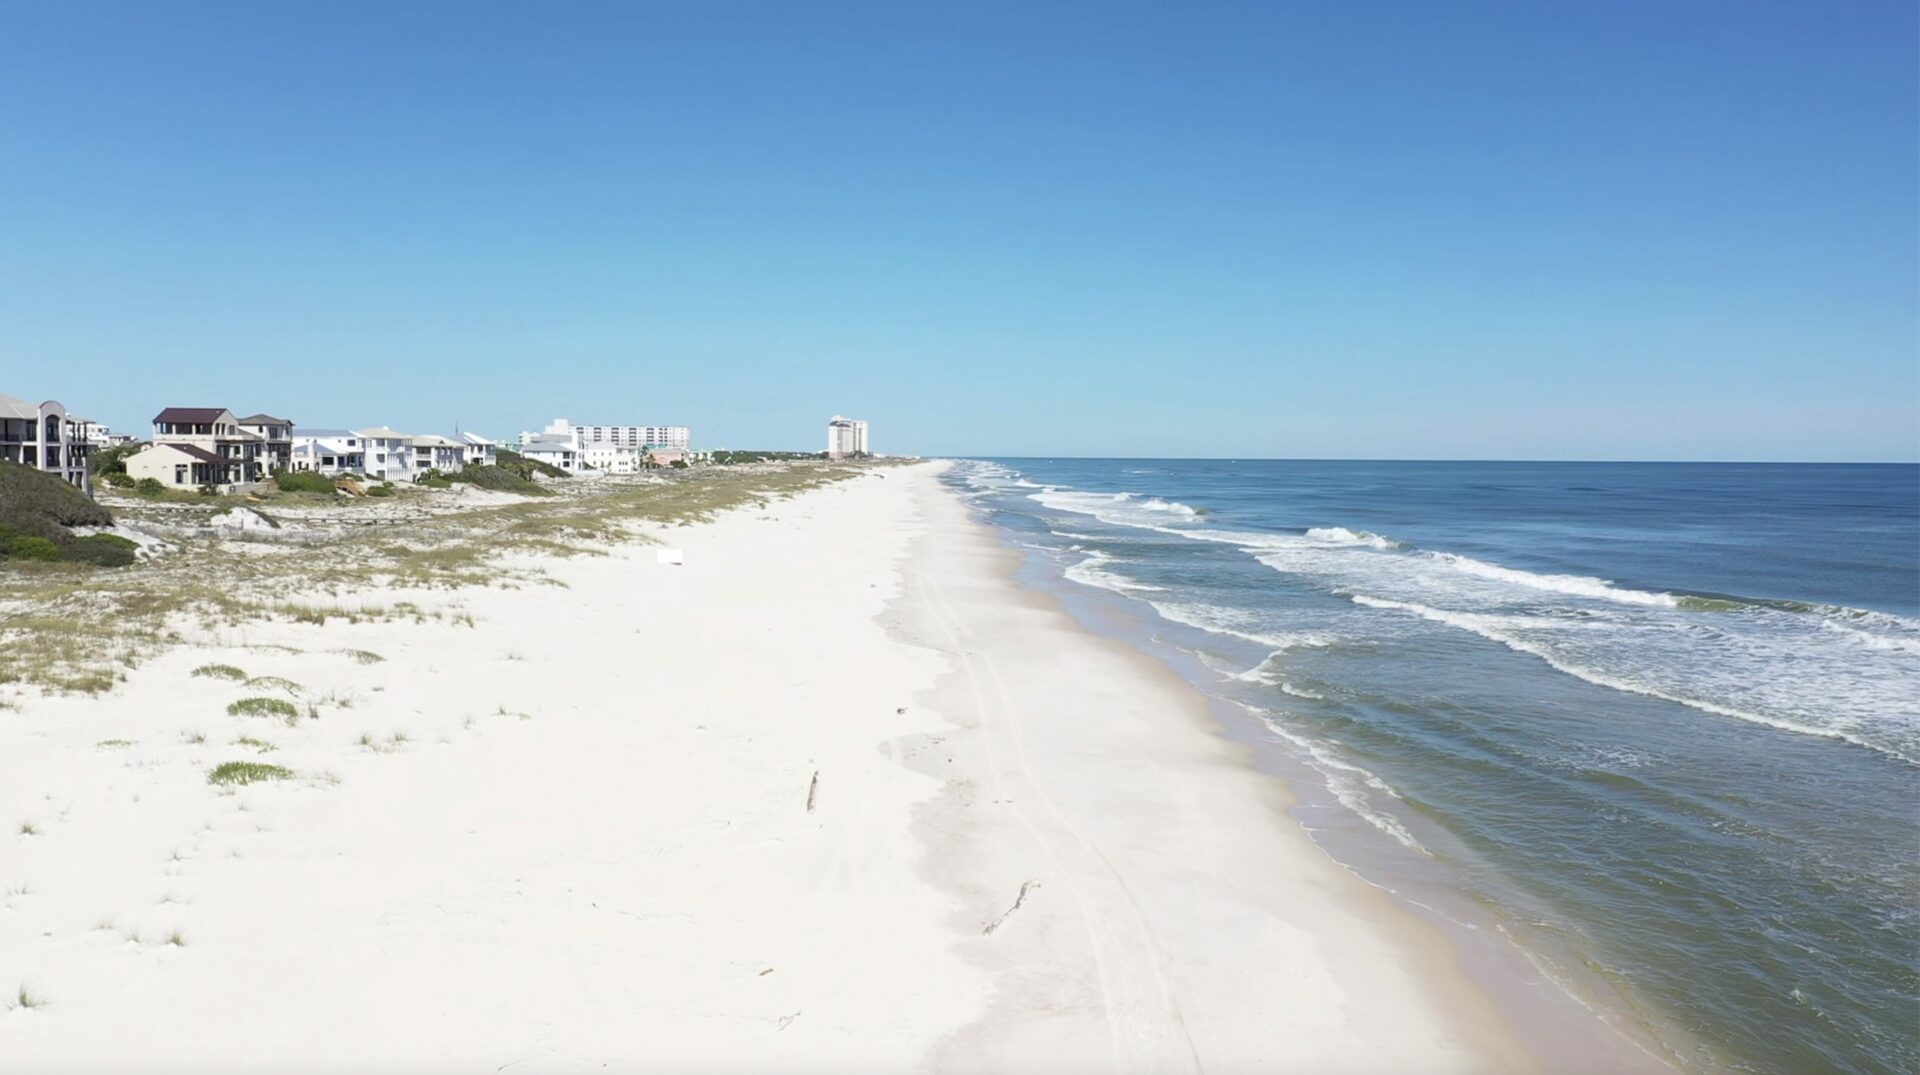 Gulf Shores coast line with the ocean waves--photo courtesy of Alabama Beaches Tourism